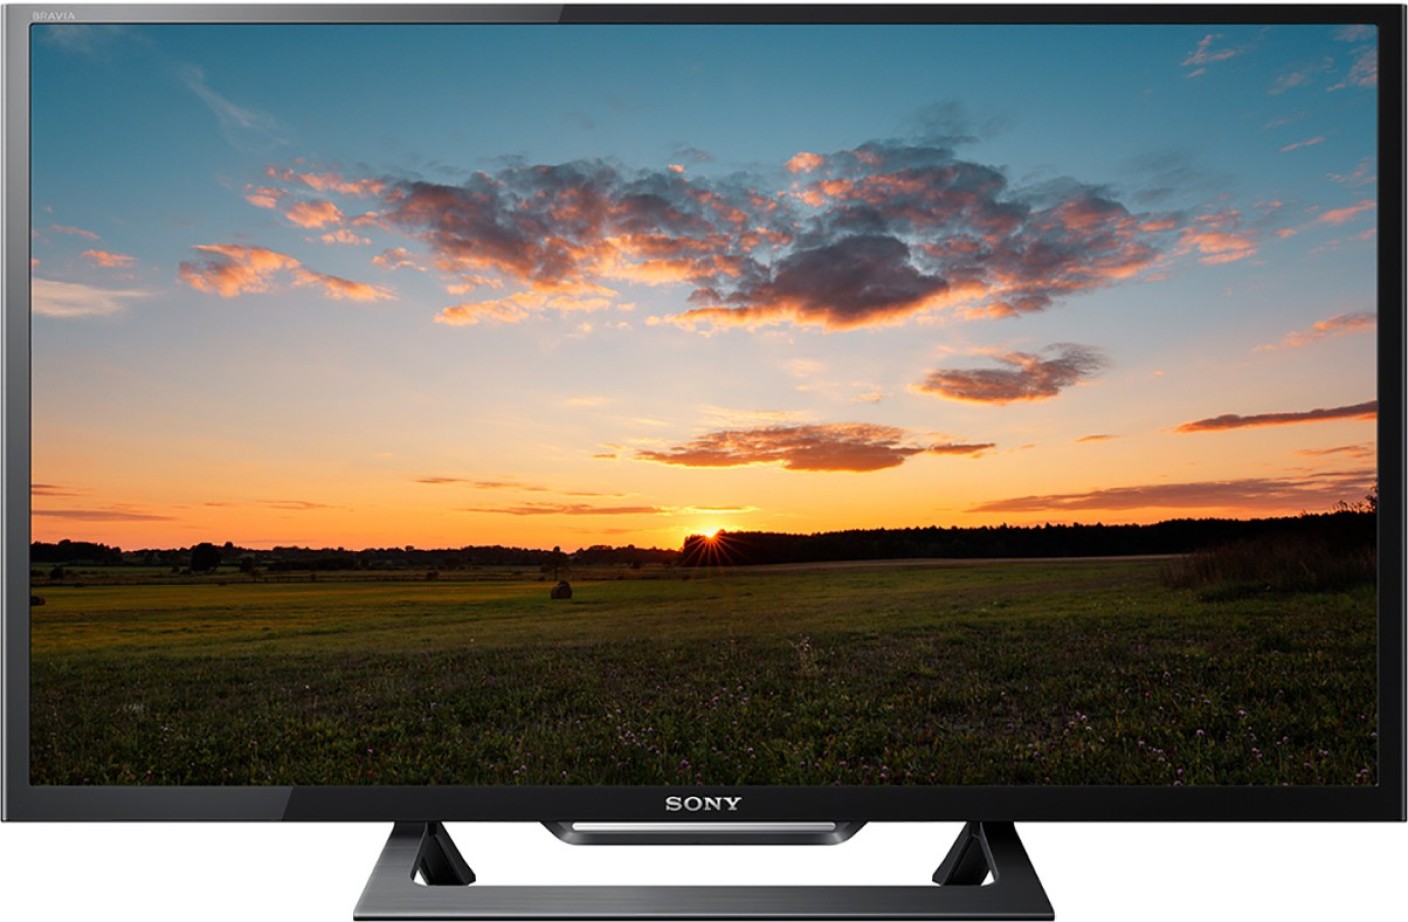 Sony Bravia 80 Cm  32 Inch  Hd Ready Led Tv Online At Best